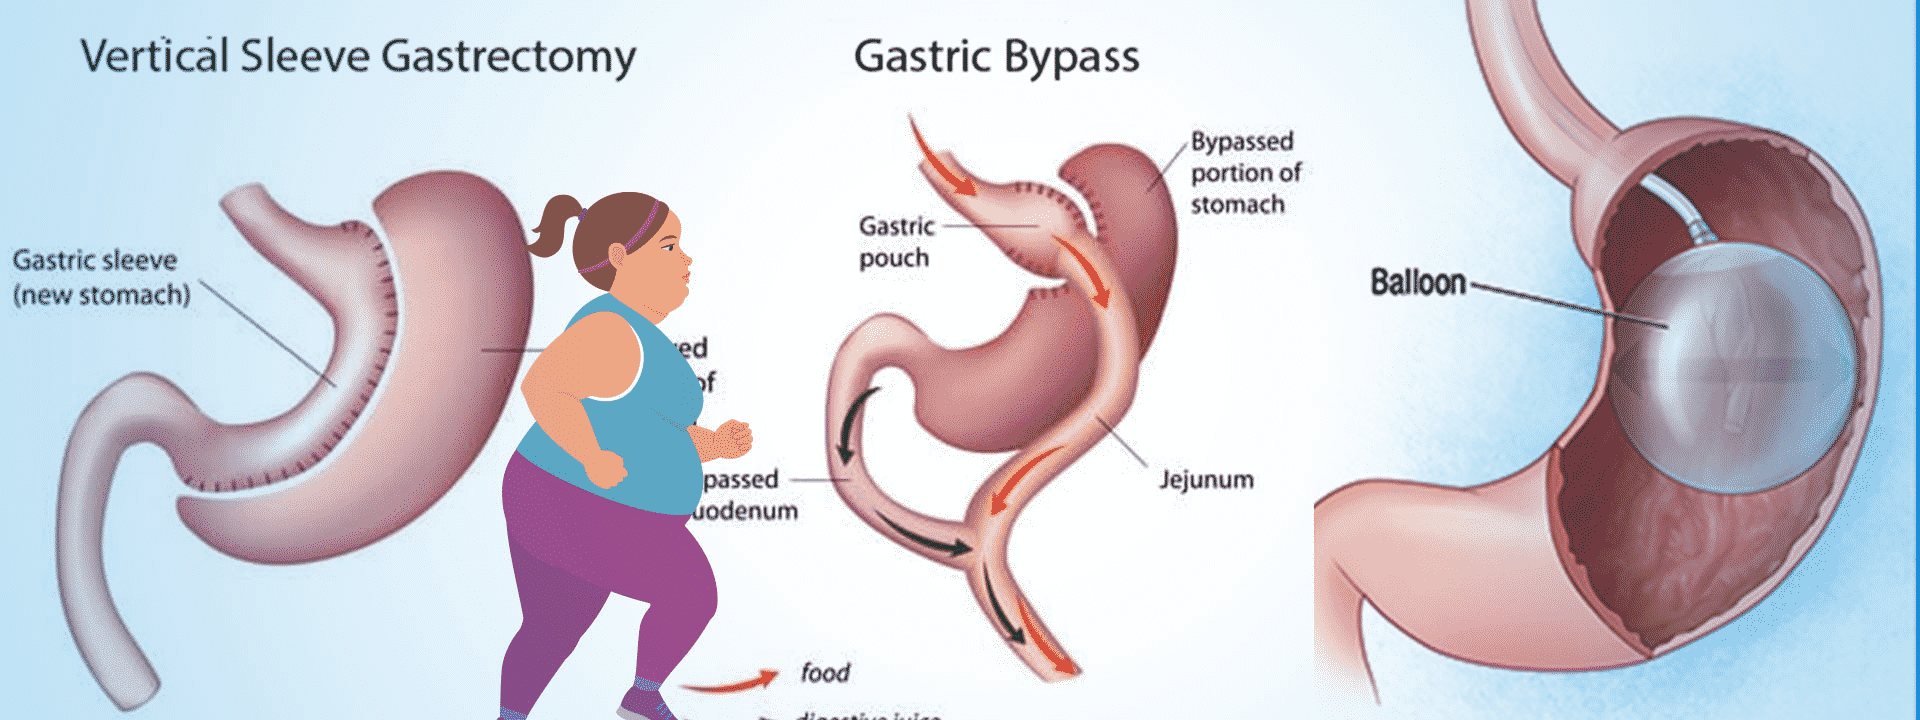 Vertical Sleeve Gastrectomy and Gastric Bypass surgery by Dr Venugopal Pareek, Best Bariatric surgeon in Hyderabad